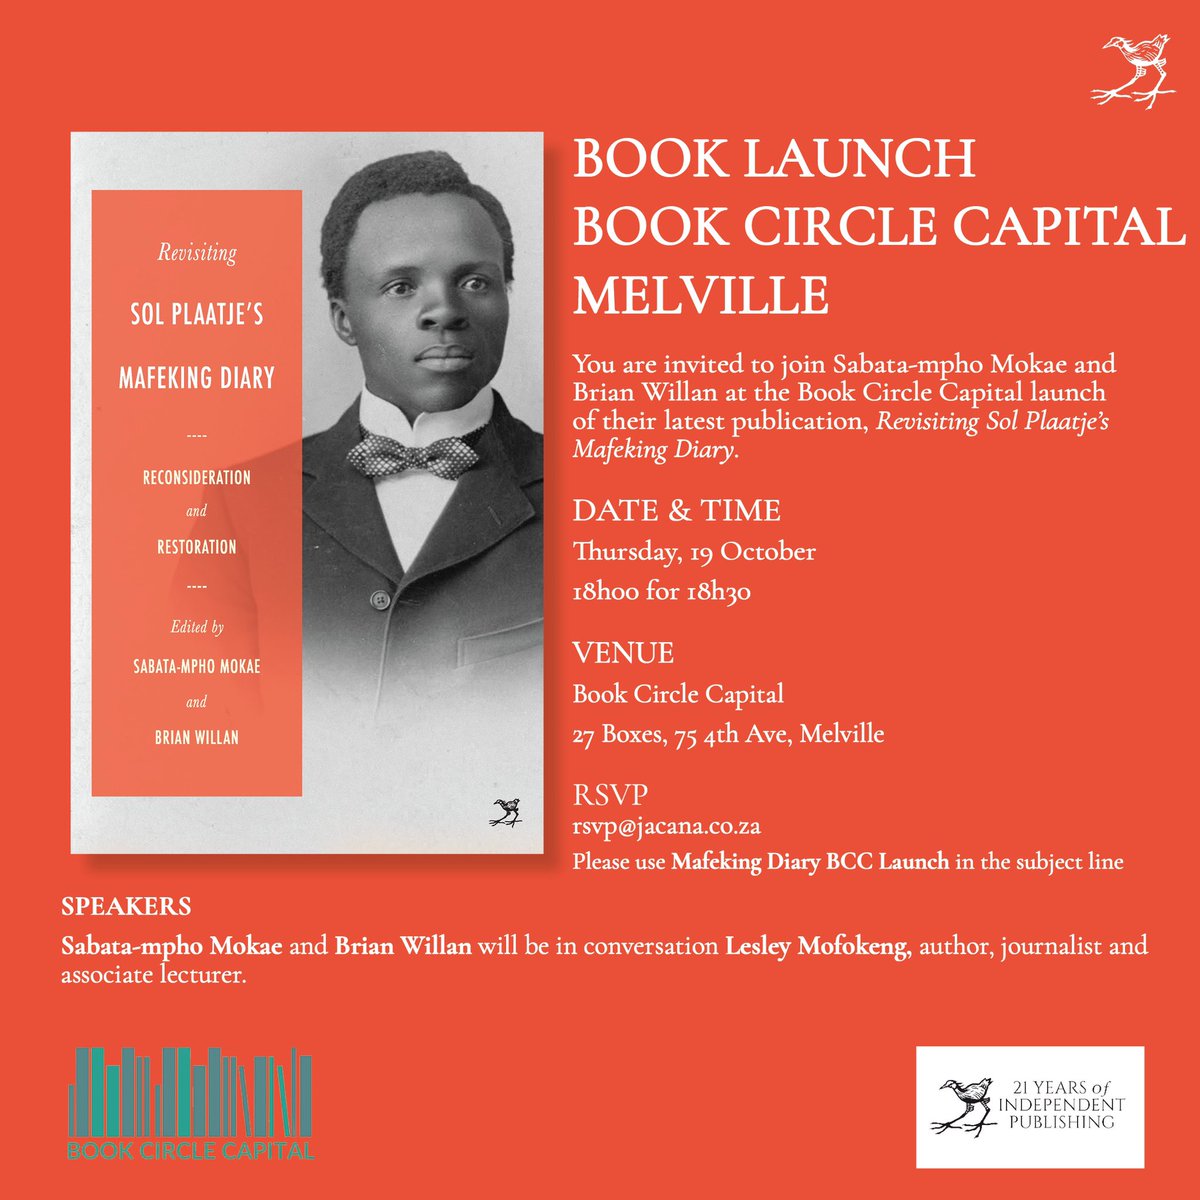 The books are here! We are ready for Thursday with @mokaewriter #BrianWillan @lesleymofokeng @JacanaMedia  - Sol Plaatjie’s Mafeking Diary 

RSVP on email address below 👇🏾